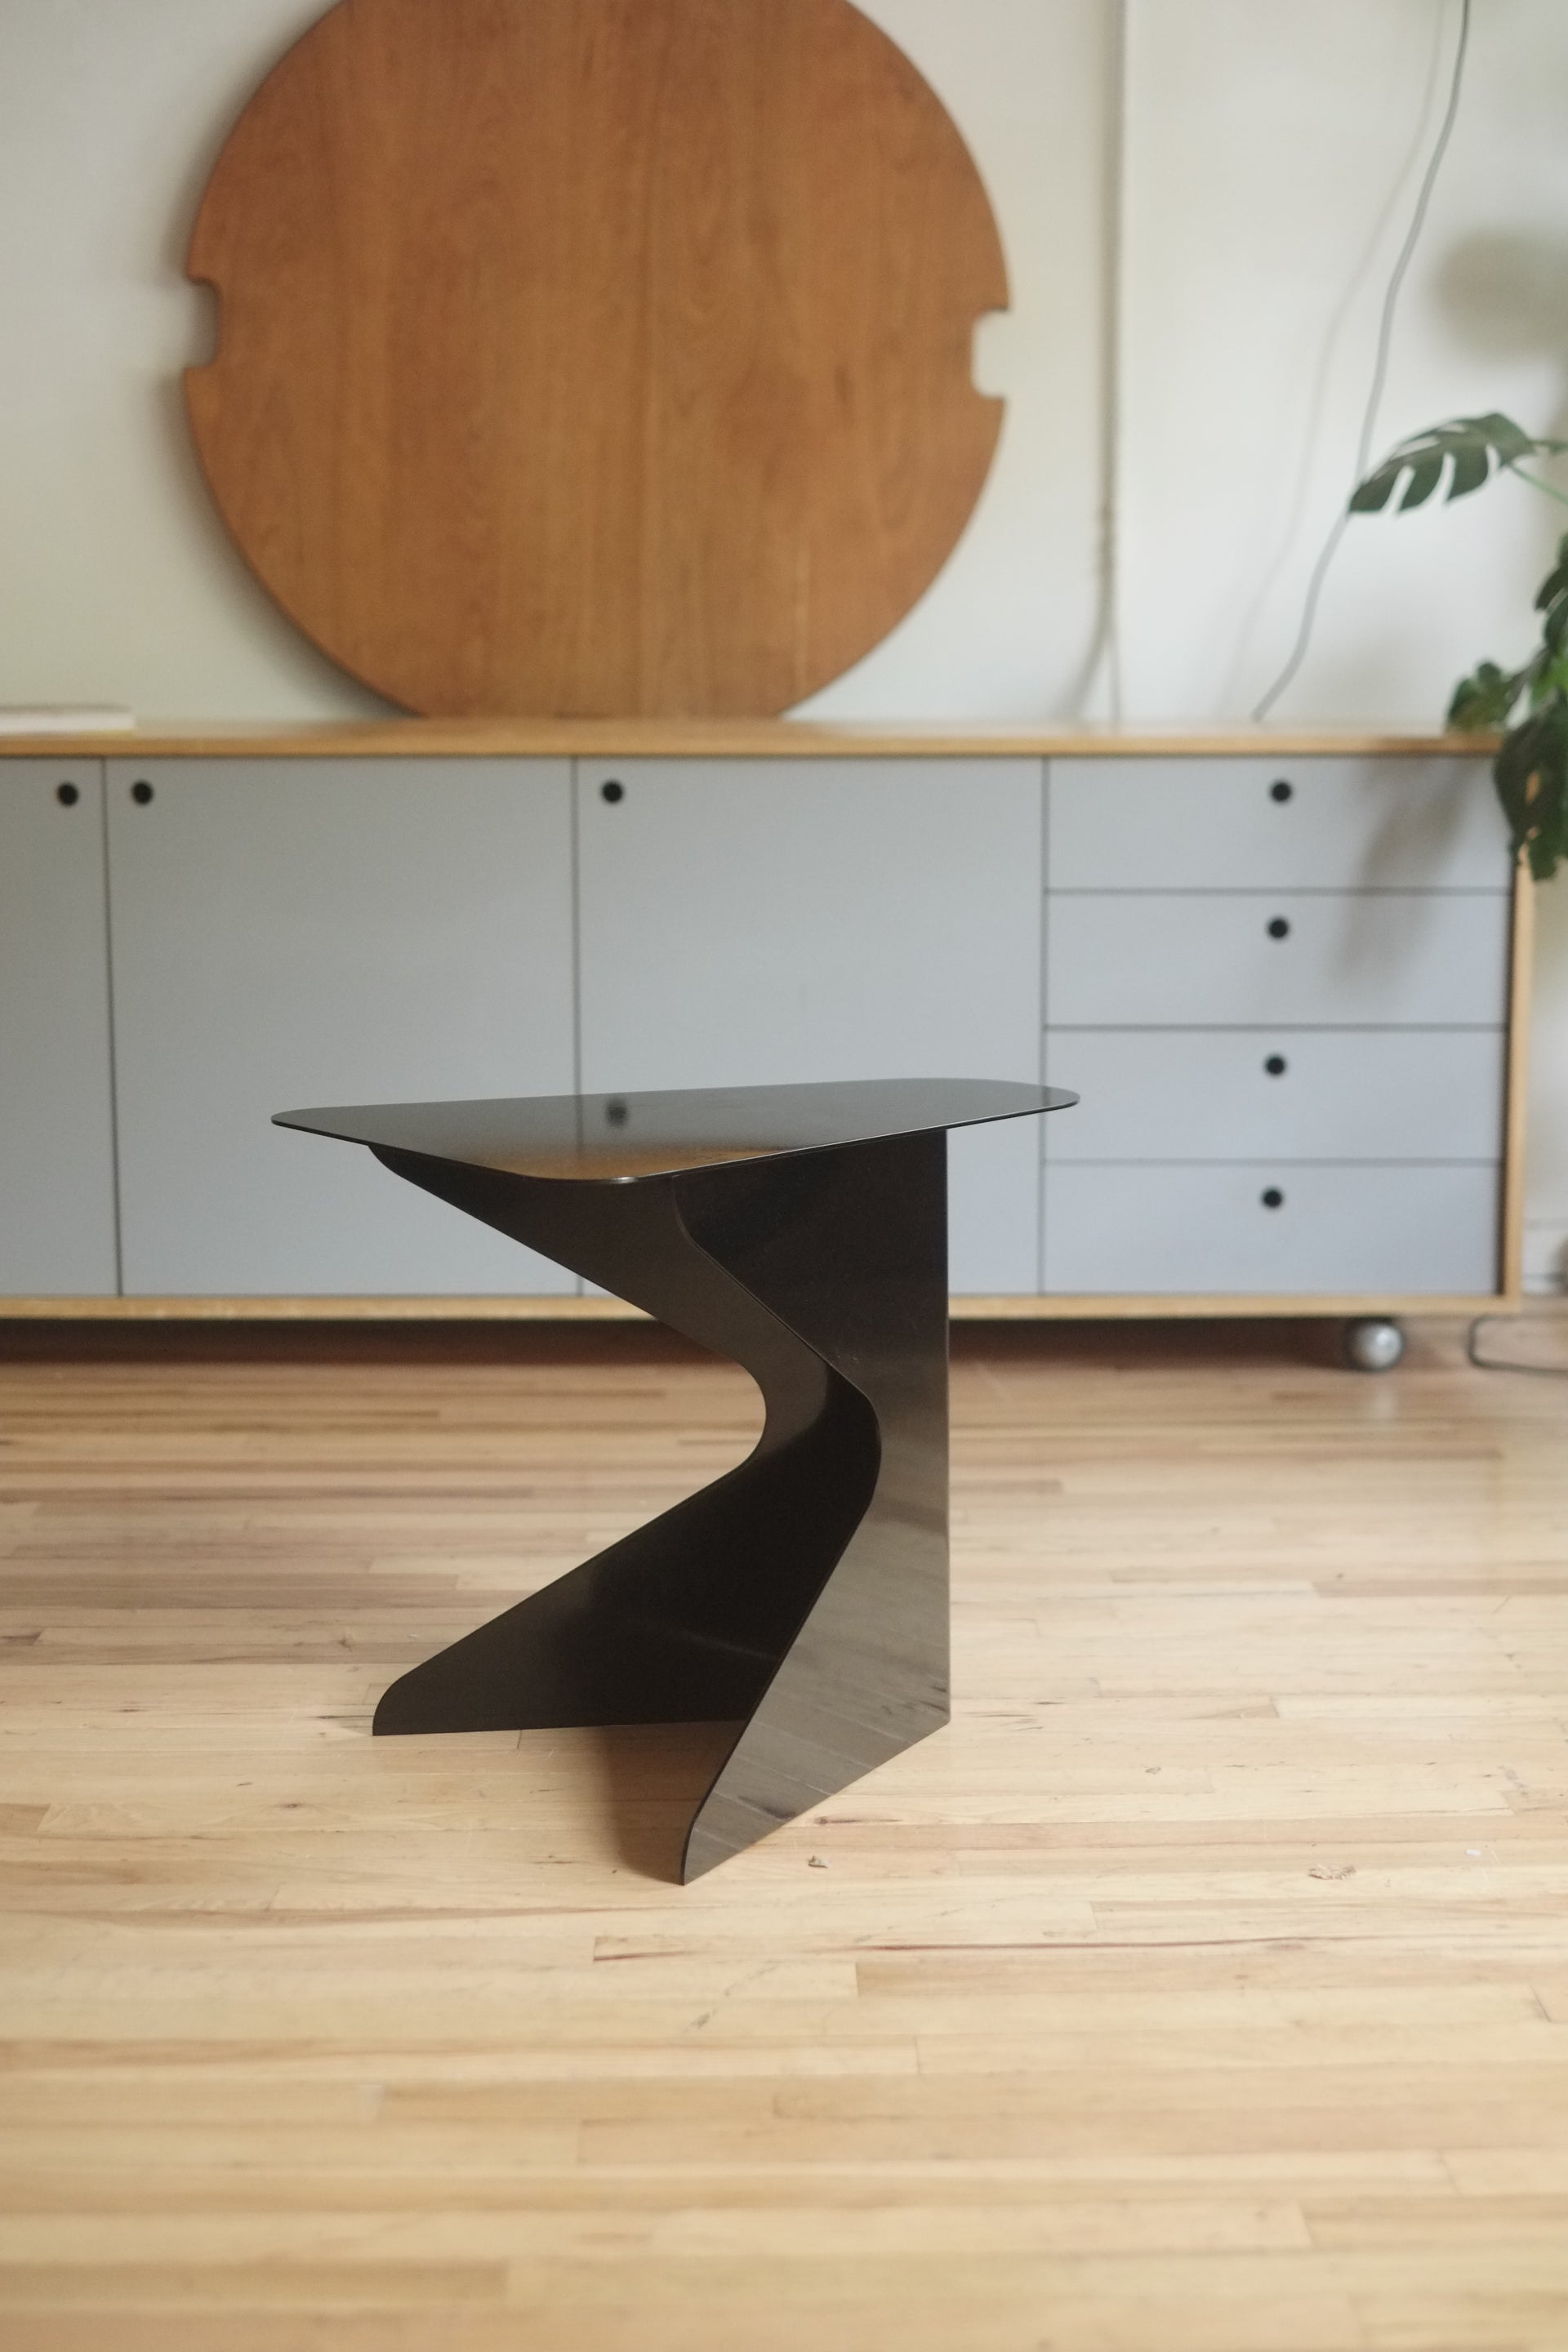 LM Stool by Nifemi-Marcus Bello (Black)